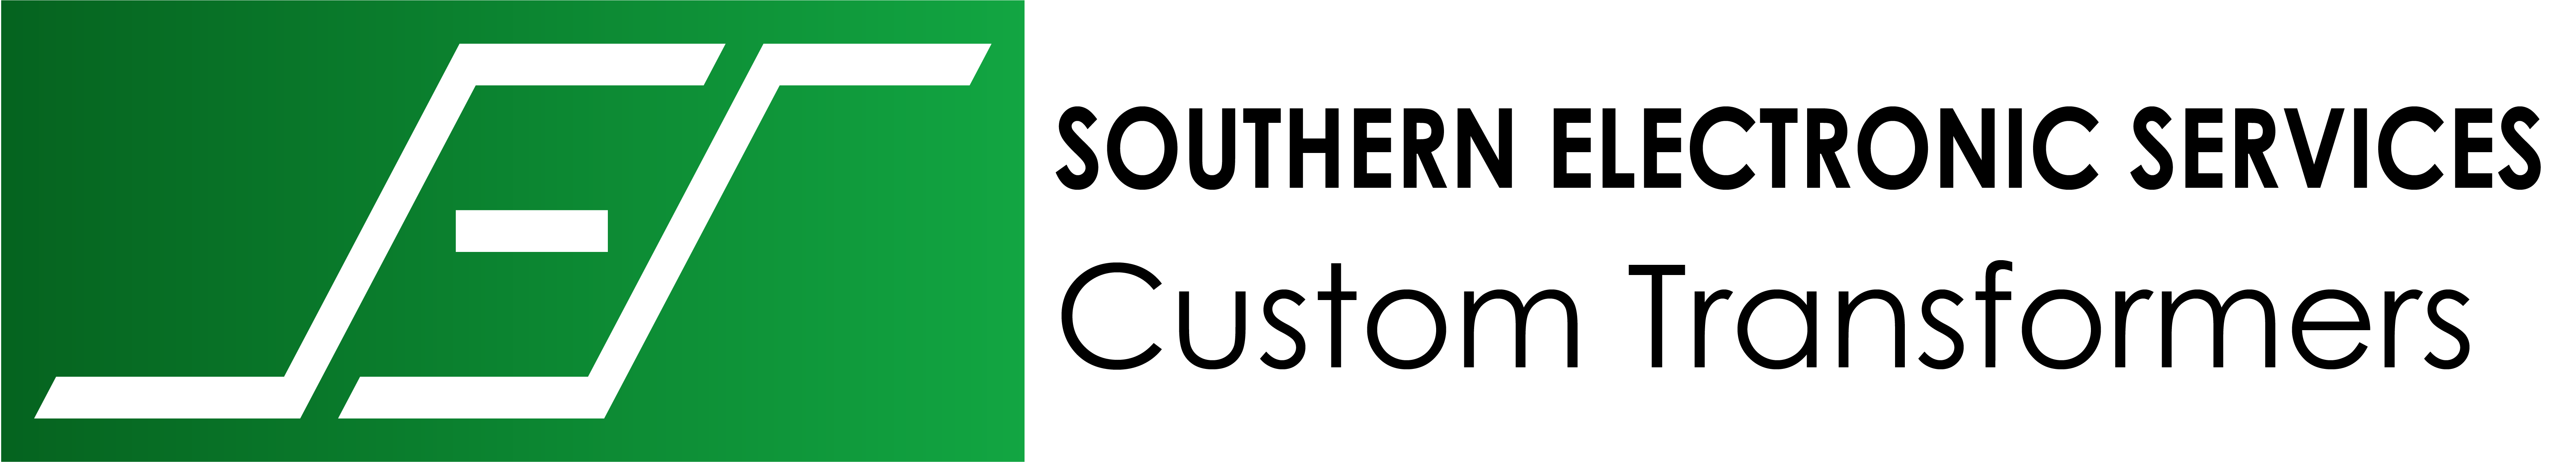 Southern Electronic Services